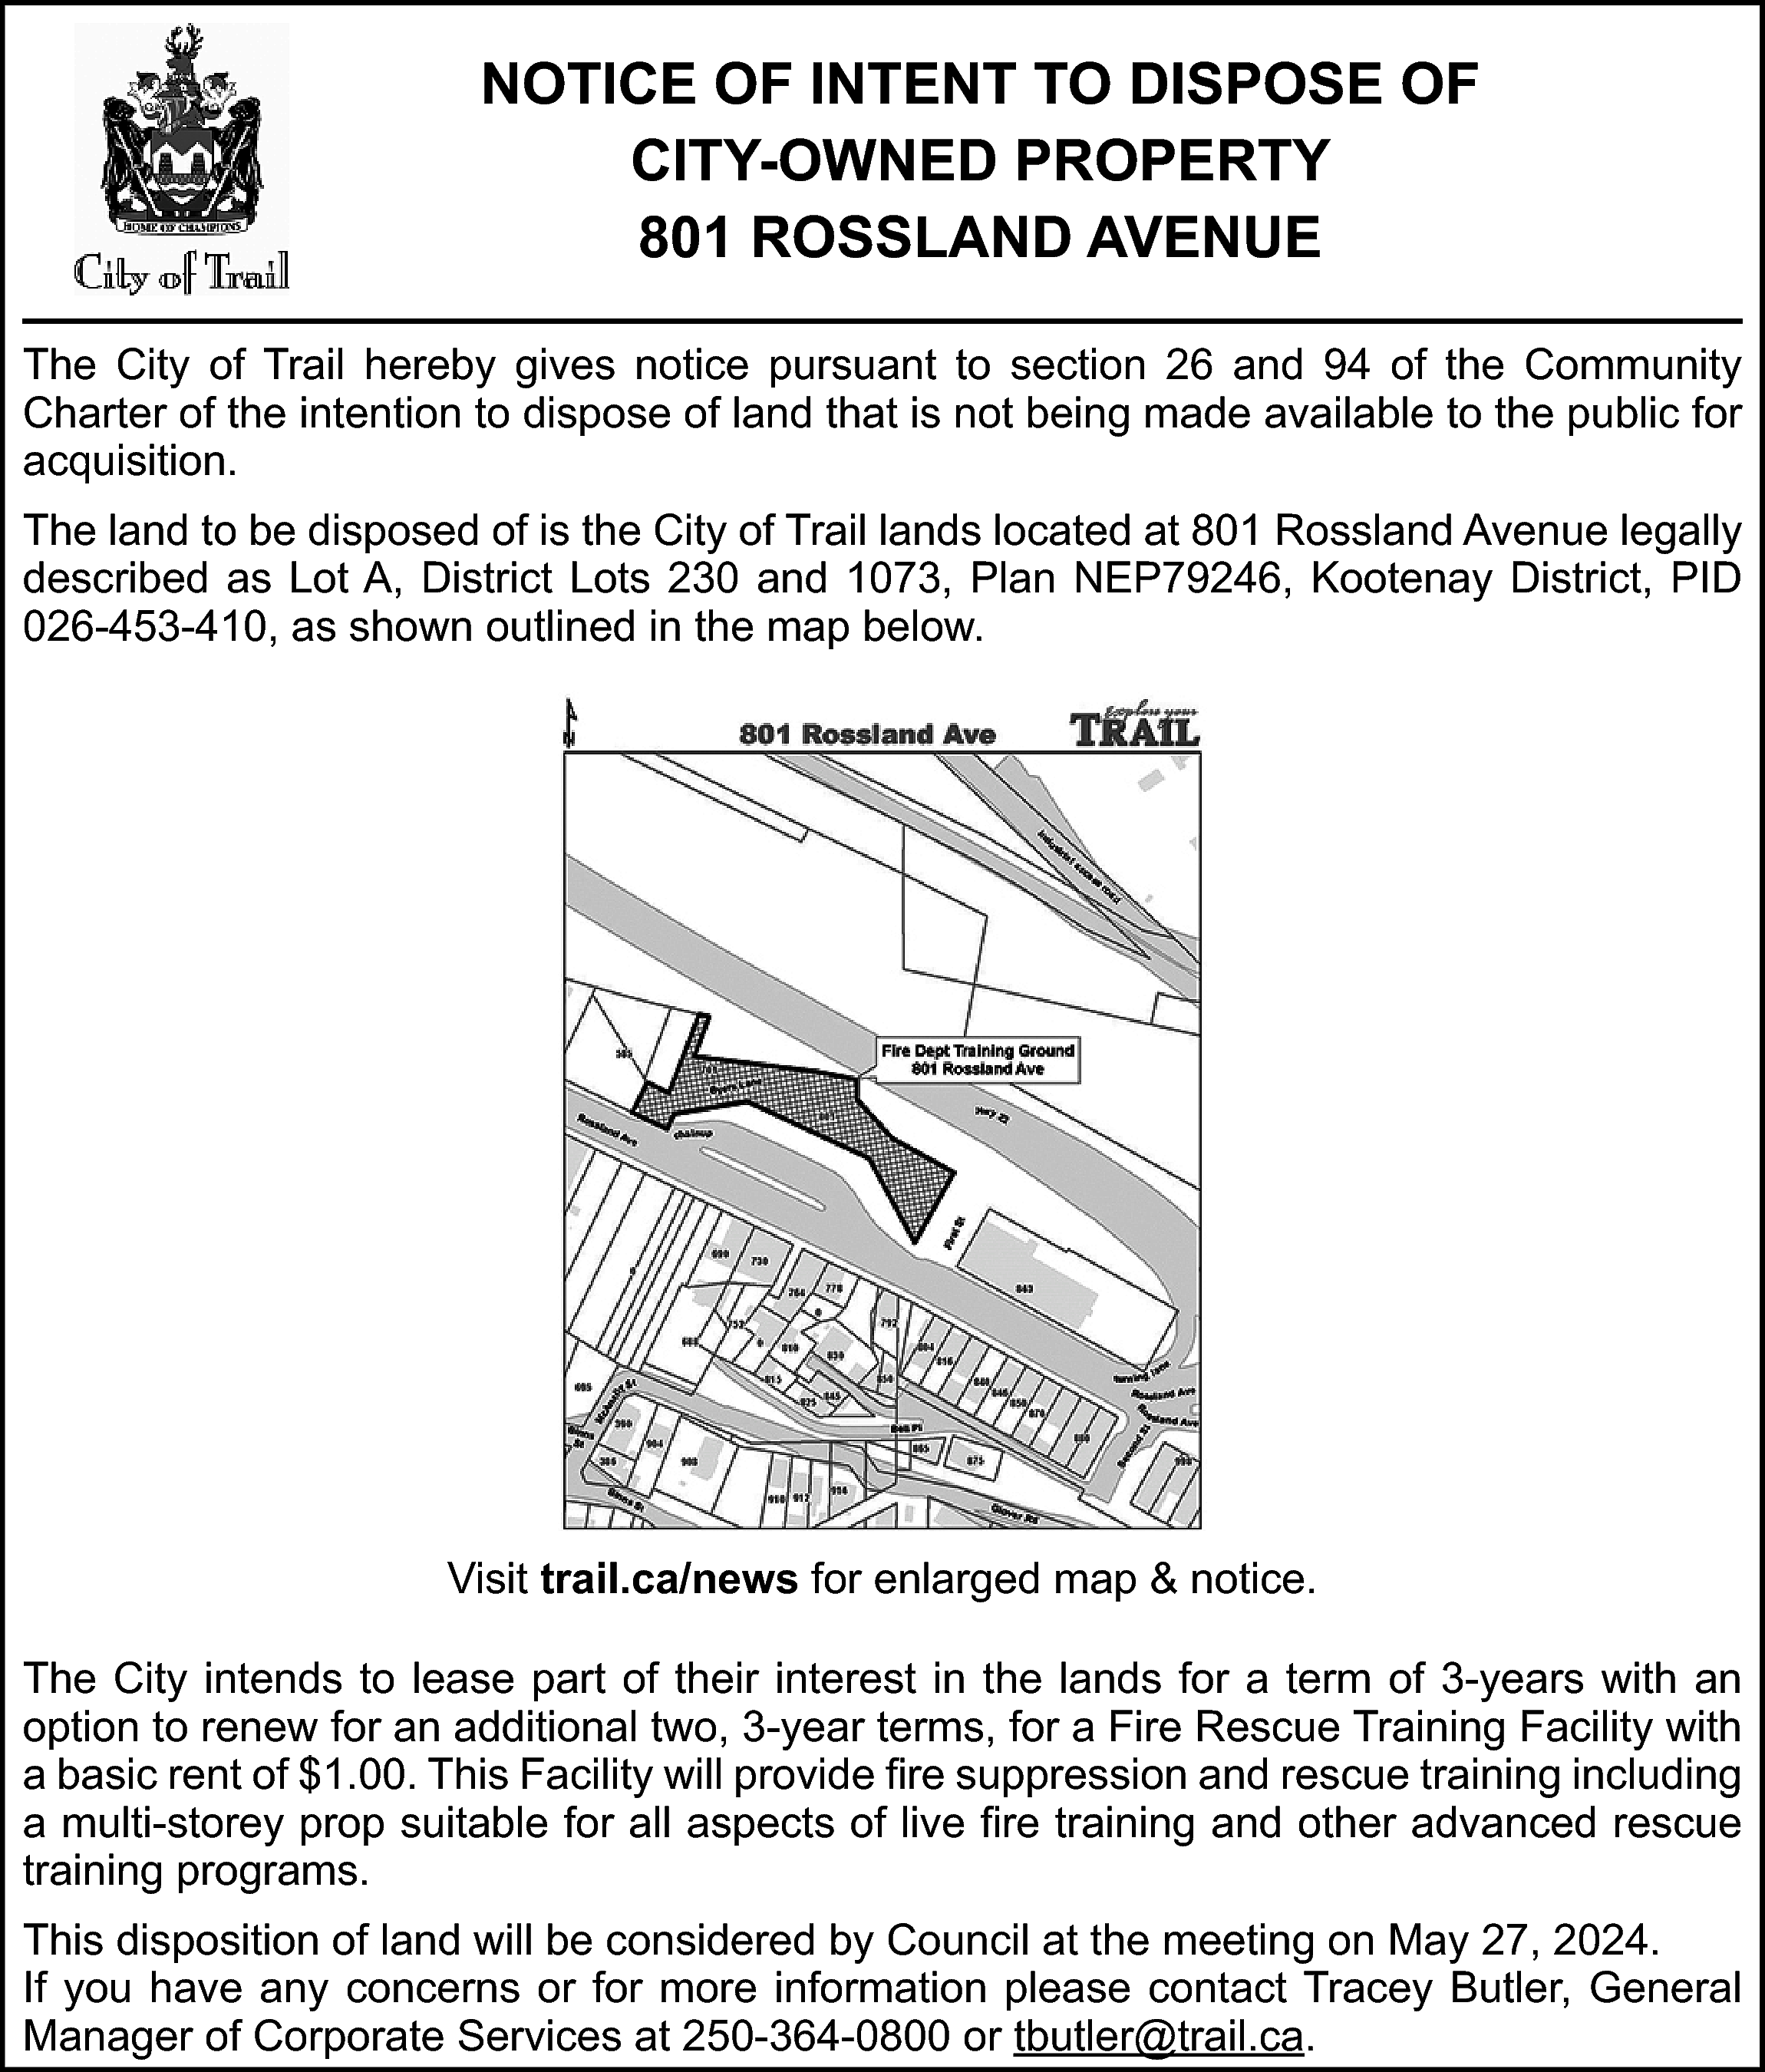 NOTICE OF INTENT TO DISPOSE  NOTICE OF INTENT TO DISPOSE OF  CITY-OWNED PROPERTY  801 ROSSLAND AVENUE  The City of Trail hereby gives notice pursuant to section 26 and 94 of the Community  Charter of the intention to dispose of land that is not being made available to the public for  acquisition.  The land to be disposed of is the City of Trail lands located at 801 Rossland Avenue legally  described as Lot A, District Lots 230 and 1073, Plan NEP79246, Kootenay District, PID  026-453-410, as shown outlined in the map below.    https://trail.ca/news    Visit trail.ca/news for enlarged map & notice.  The City intends to lease part of their interest in the lands for a term of 3-years with an  option to renew for an additional two, 3-year terms, for a Fire Rescue Training Facility with  a basic rent of $1.00. This Facility will provide fire suppression and rescue training including  a multi-storey prop suitable for all aspects of live fire training and other advanced rescue  training programs.  This disposition of land will be considered by Council at the meeting on May 27, 2024.  If you have any concerns or for more information please contact Tracey Butler, General  Manager of Corporate Services at 250-364-0800 or tbutler@trail.ca.    